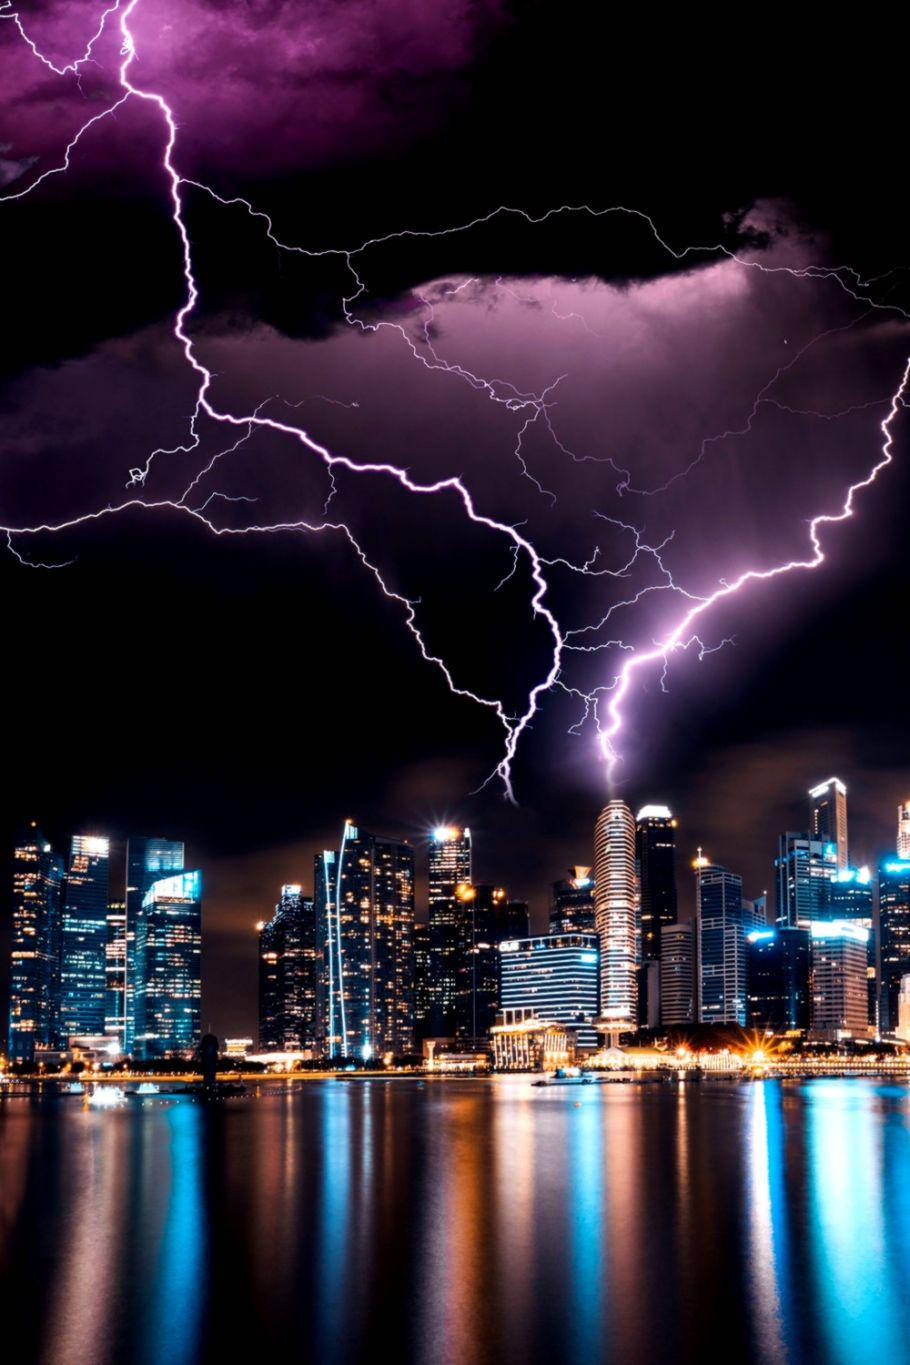 Thunderstorm In The City Wallpaper